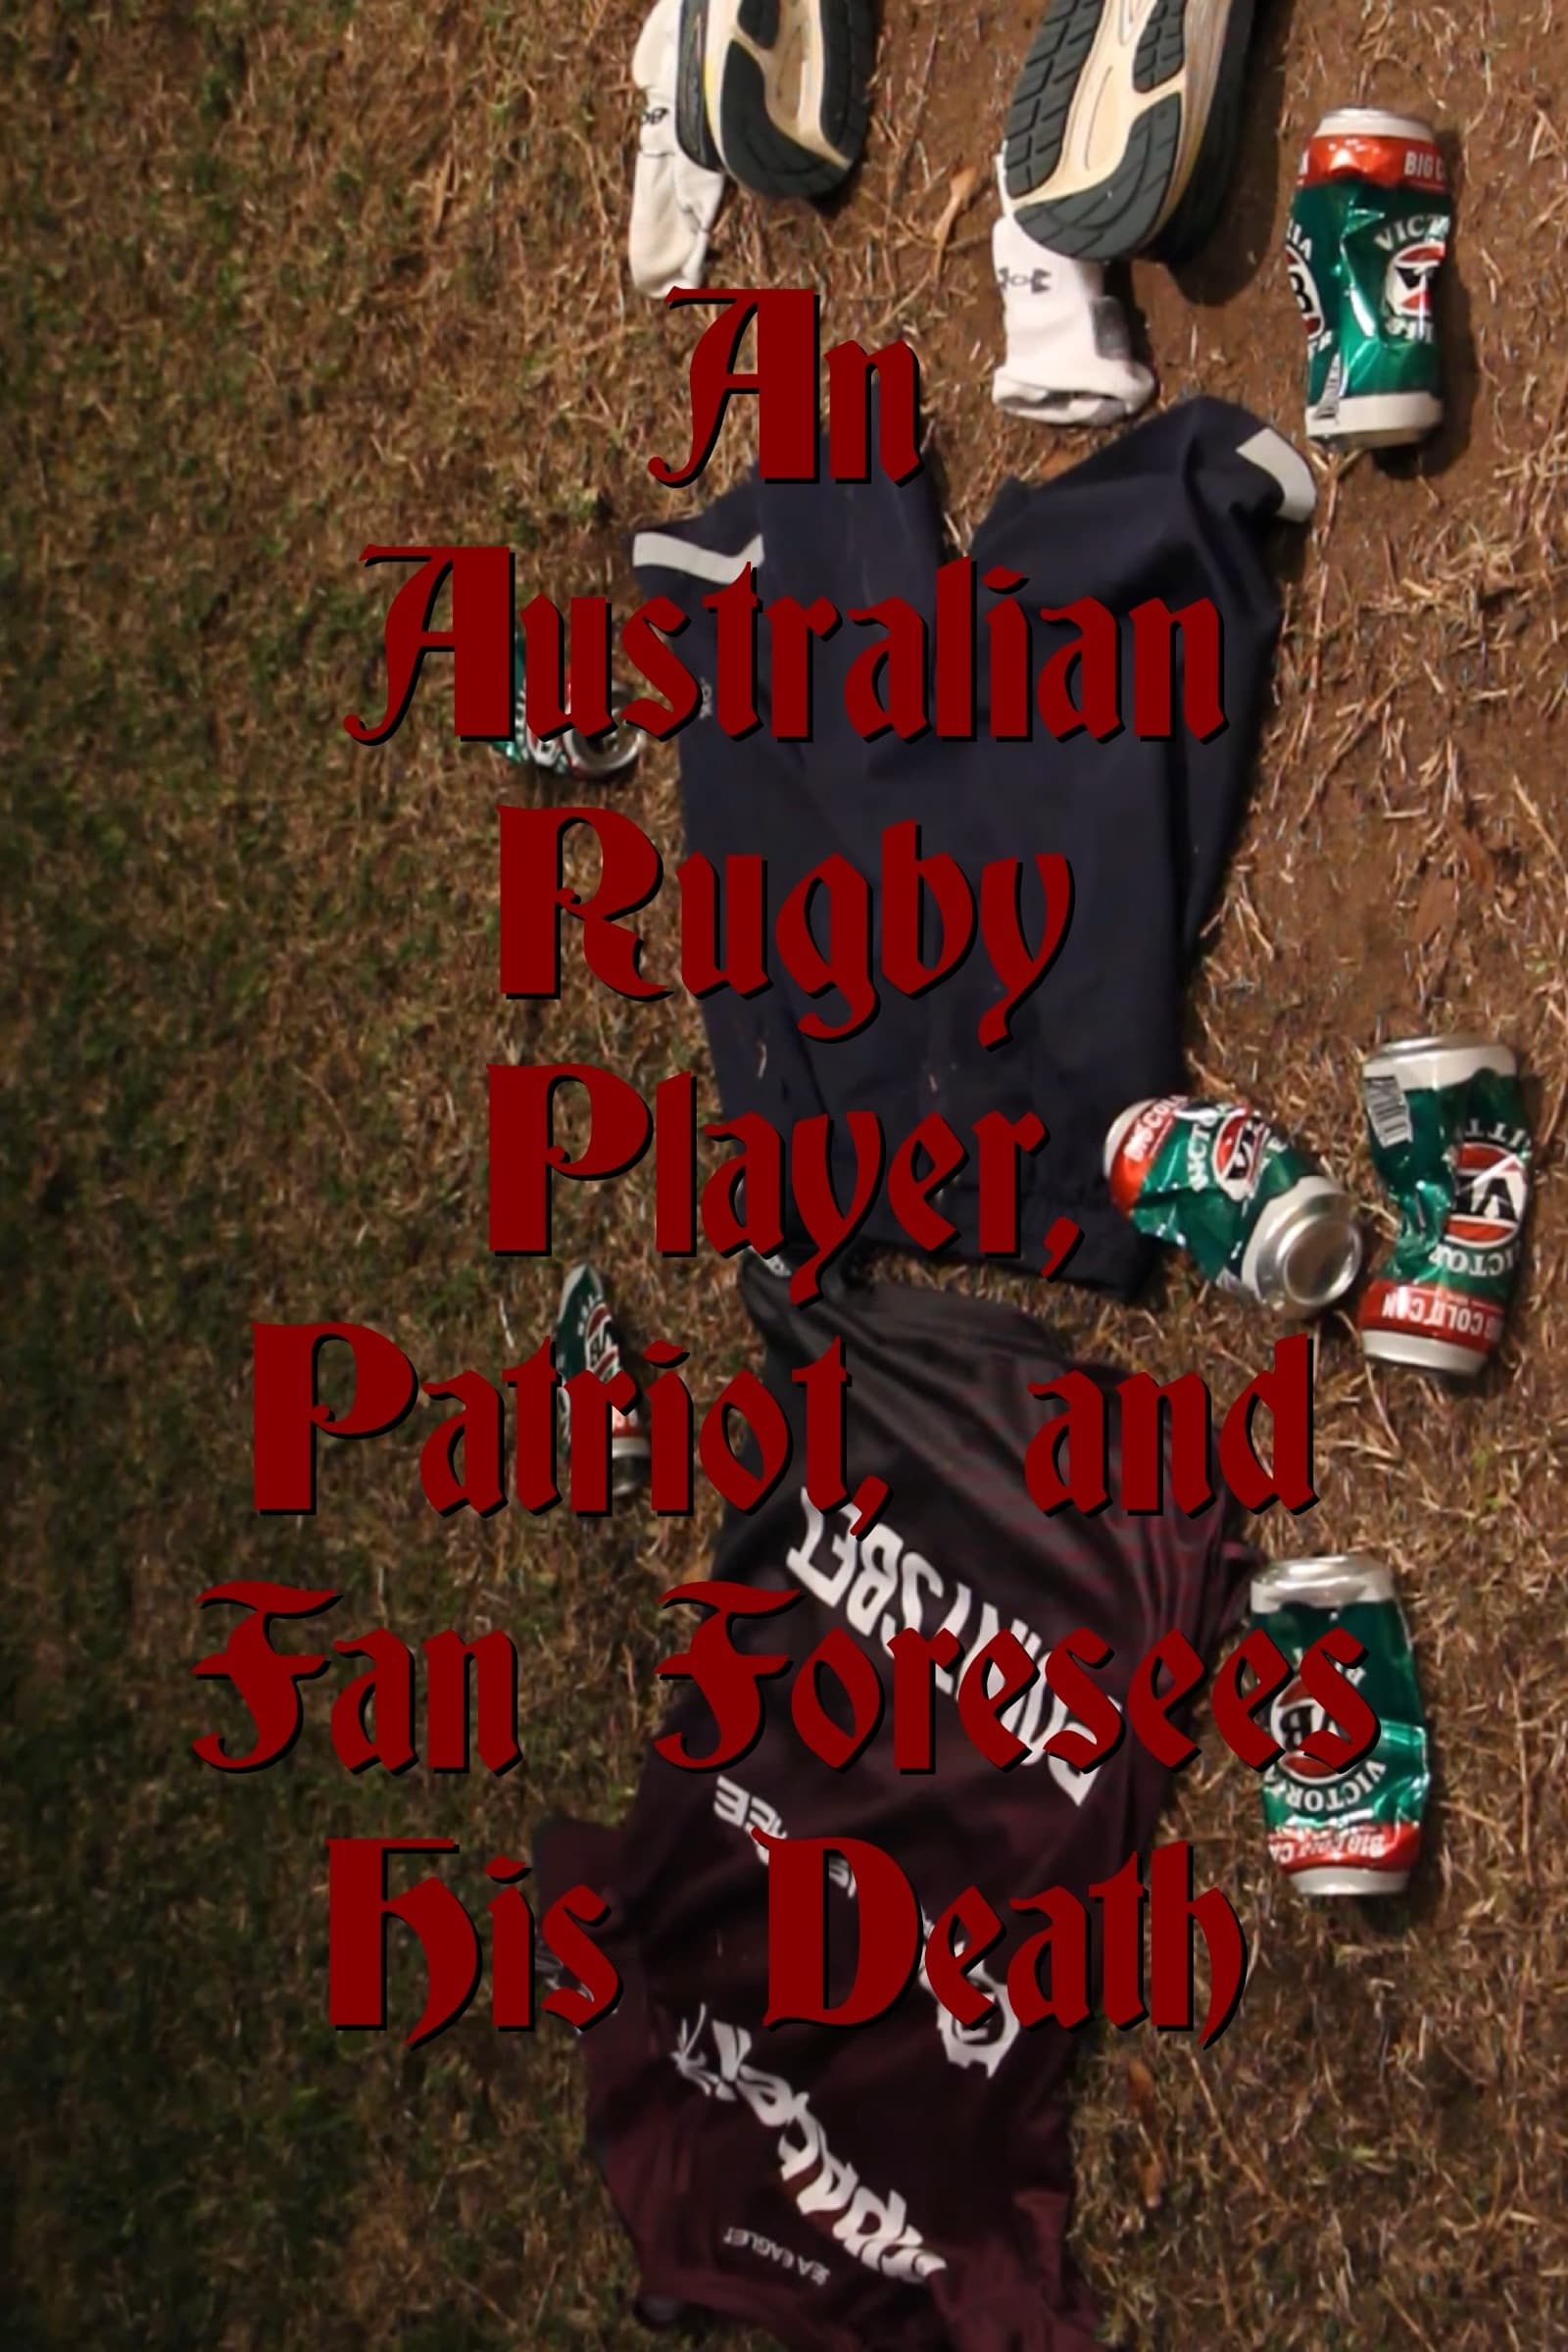 An Australian Rugby Player, Patriot, and Fan Foresees His Death